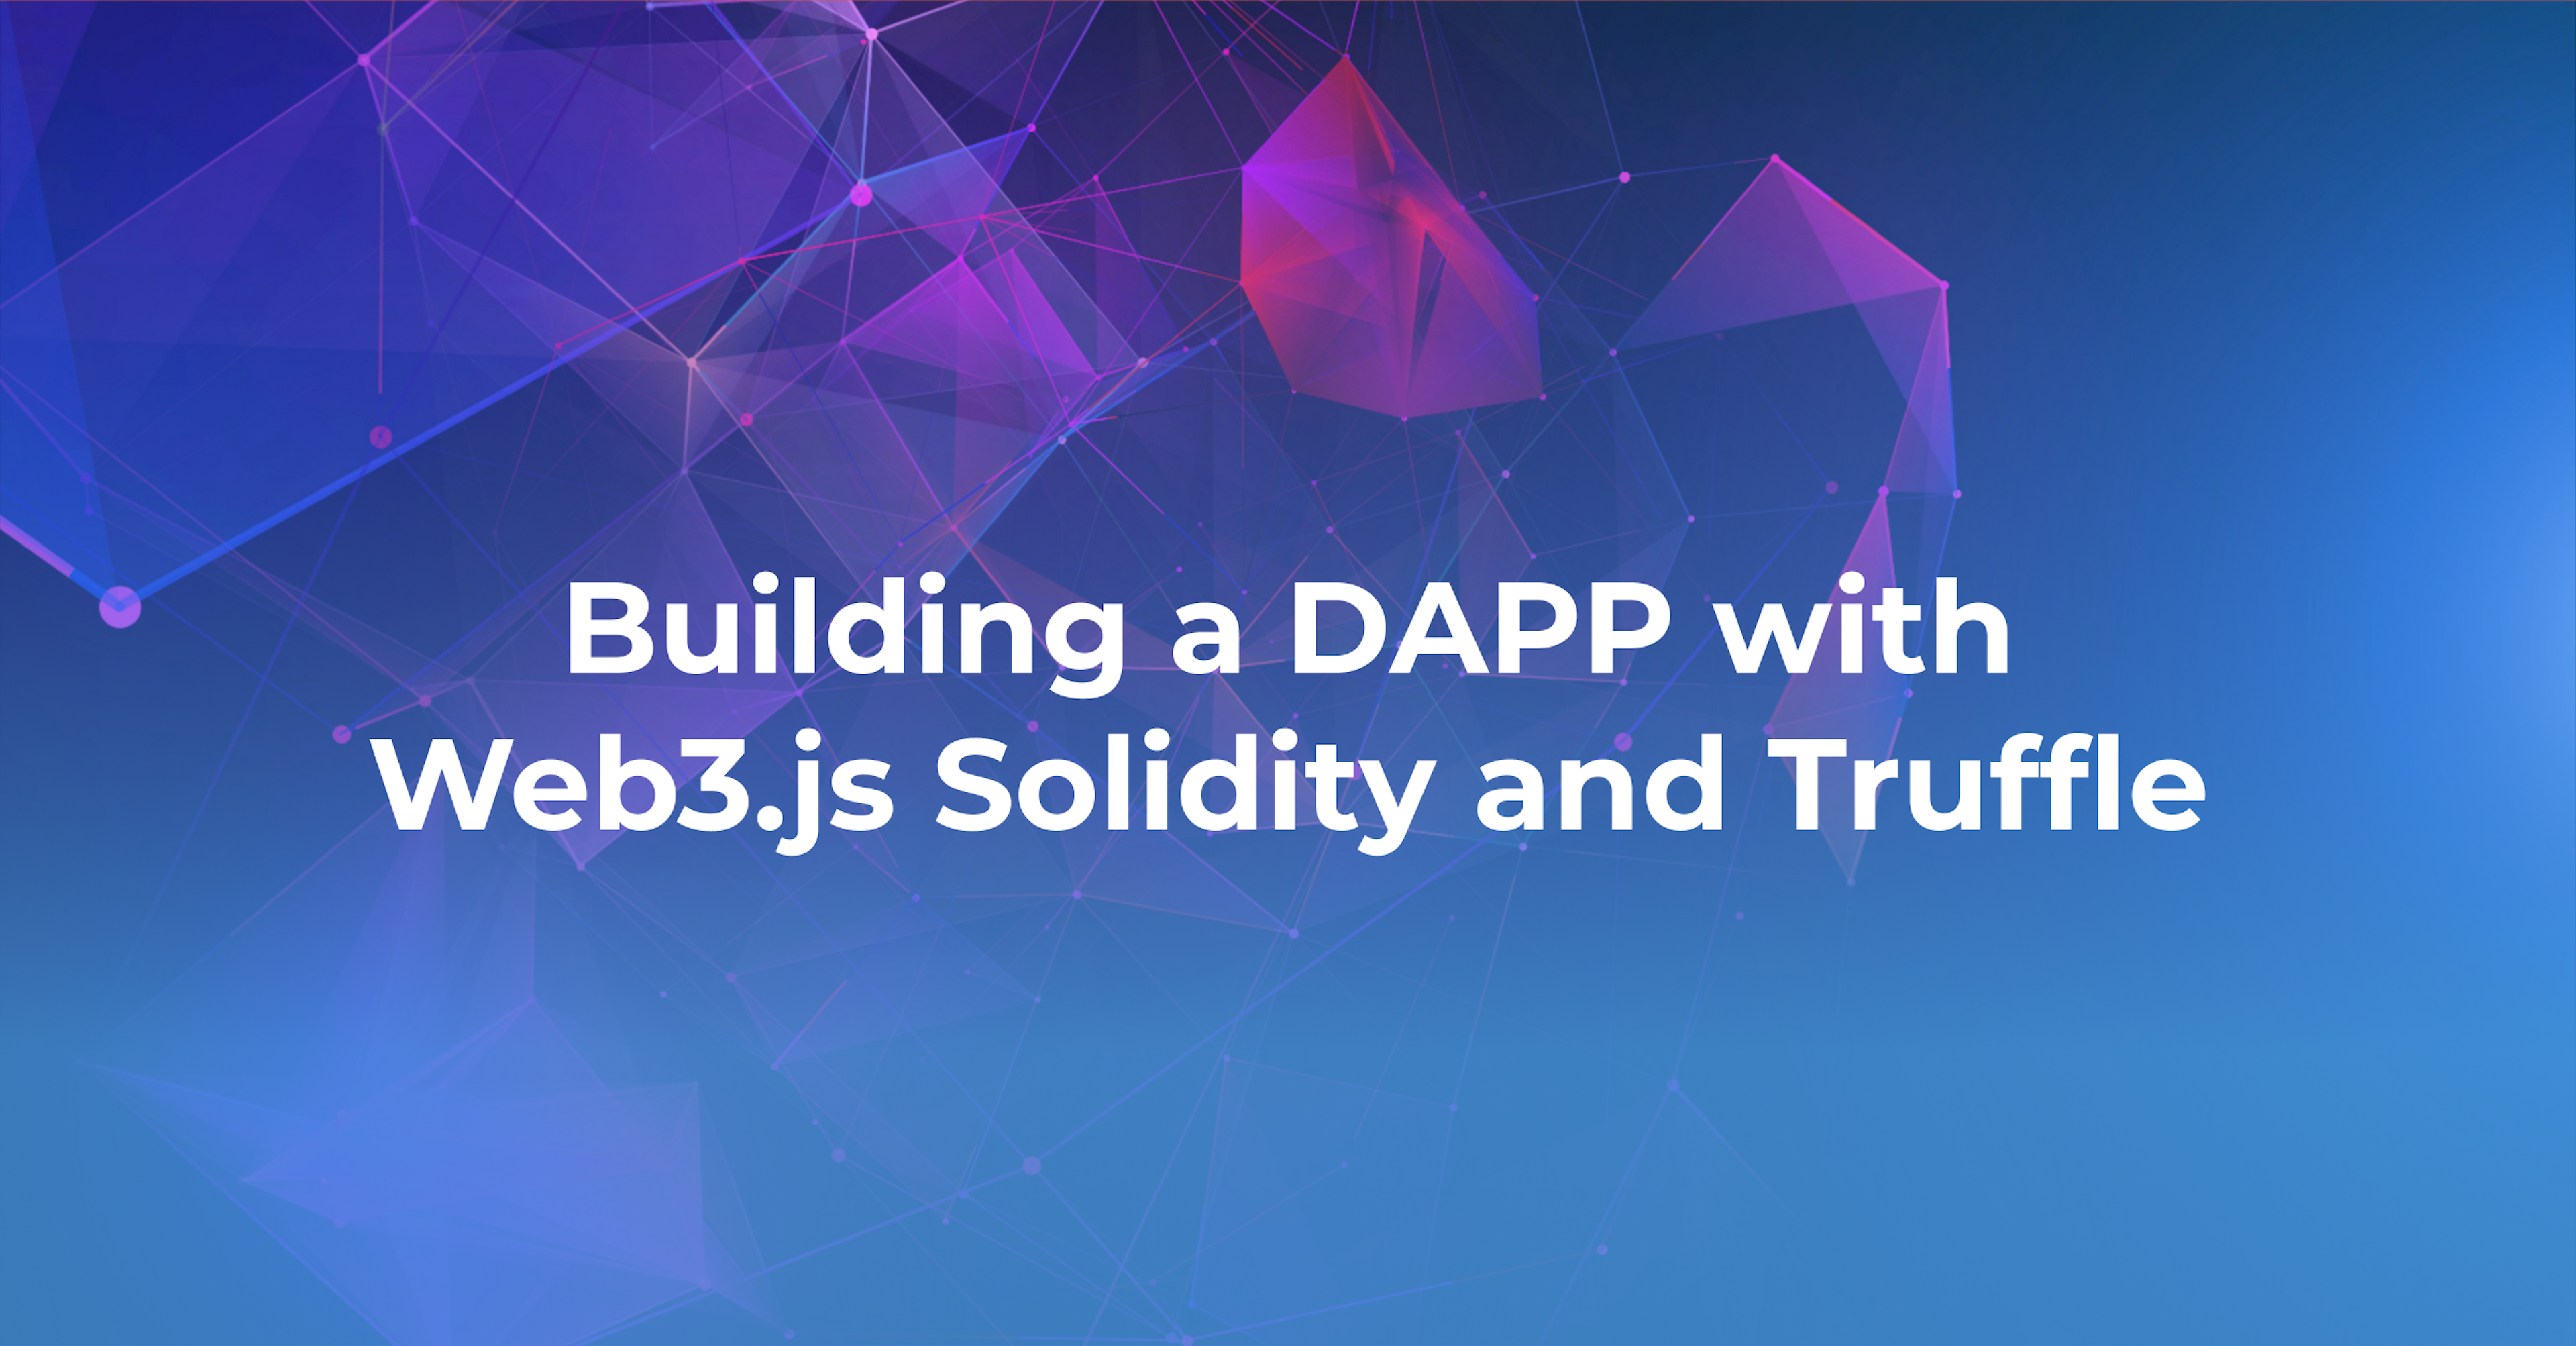 Building a DApp with Web3.js Solidity and Truffle (Part 2)